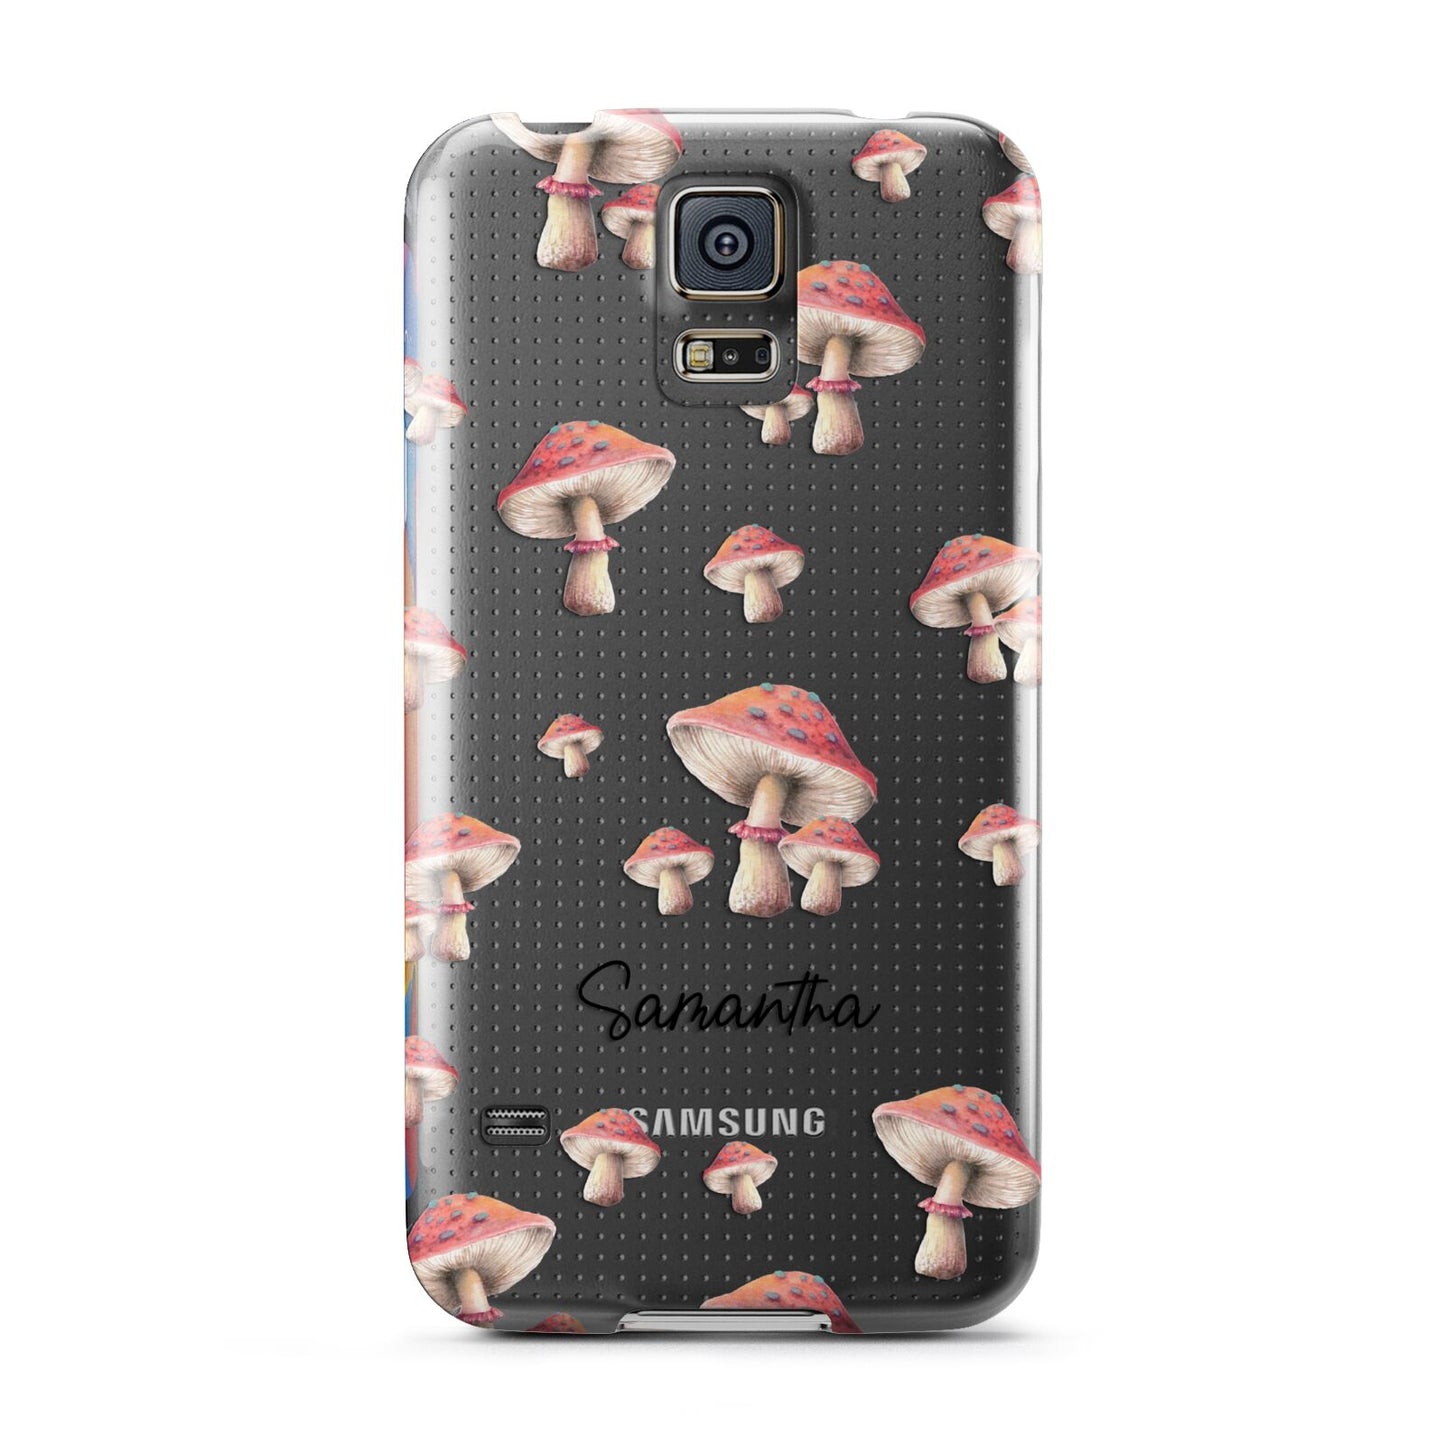 Mushroom Illustrations with Name Samsung Galaxy S5 Case